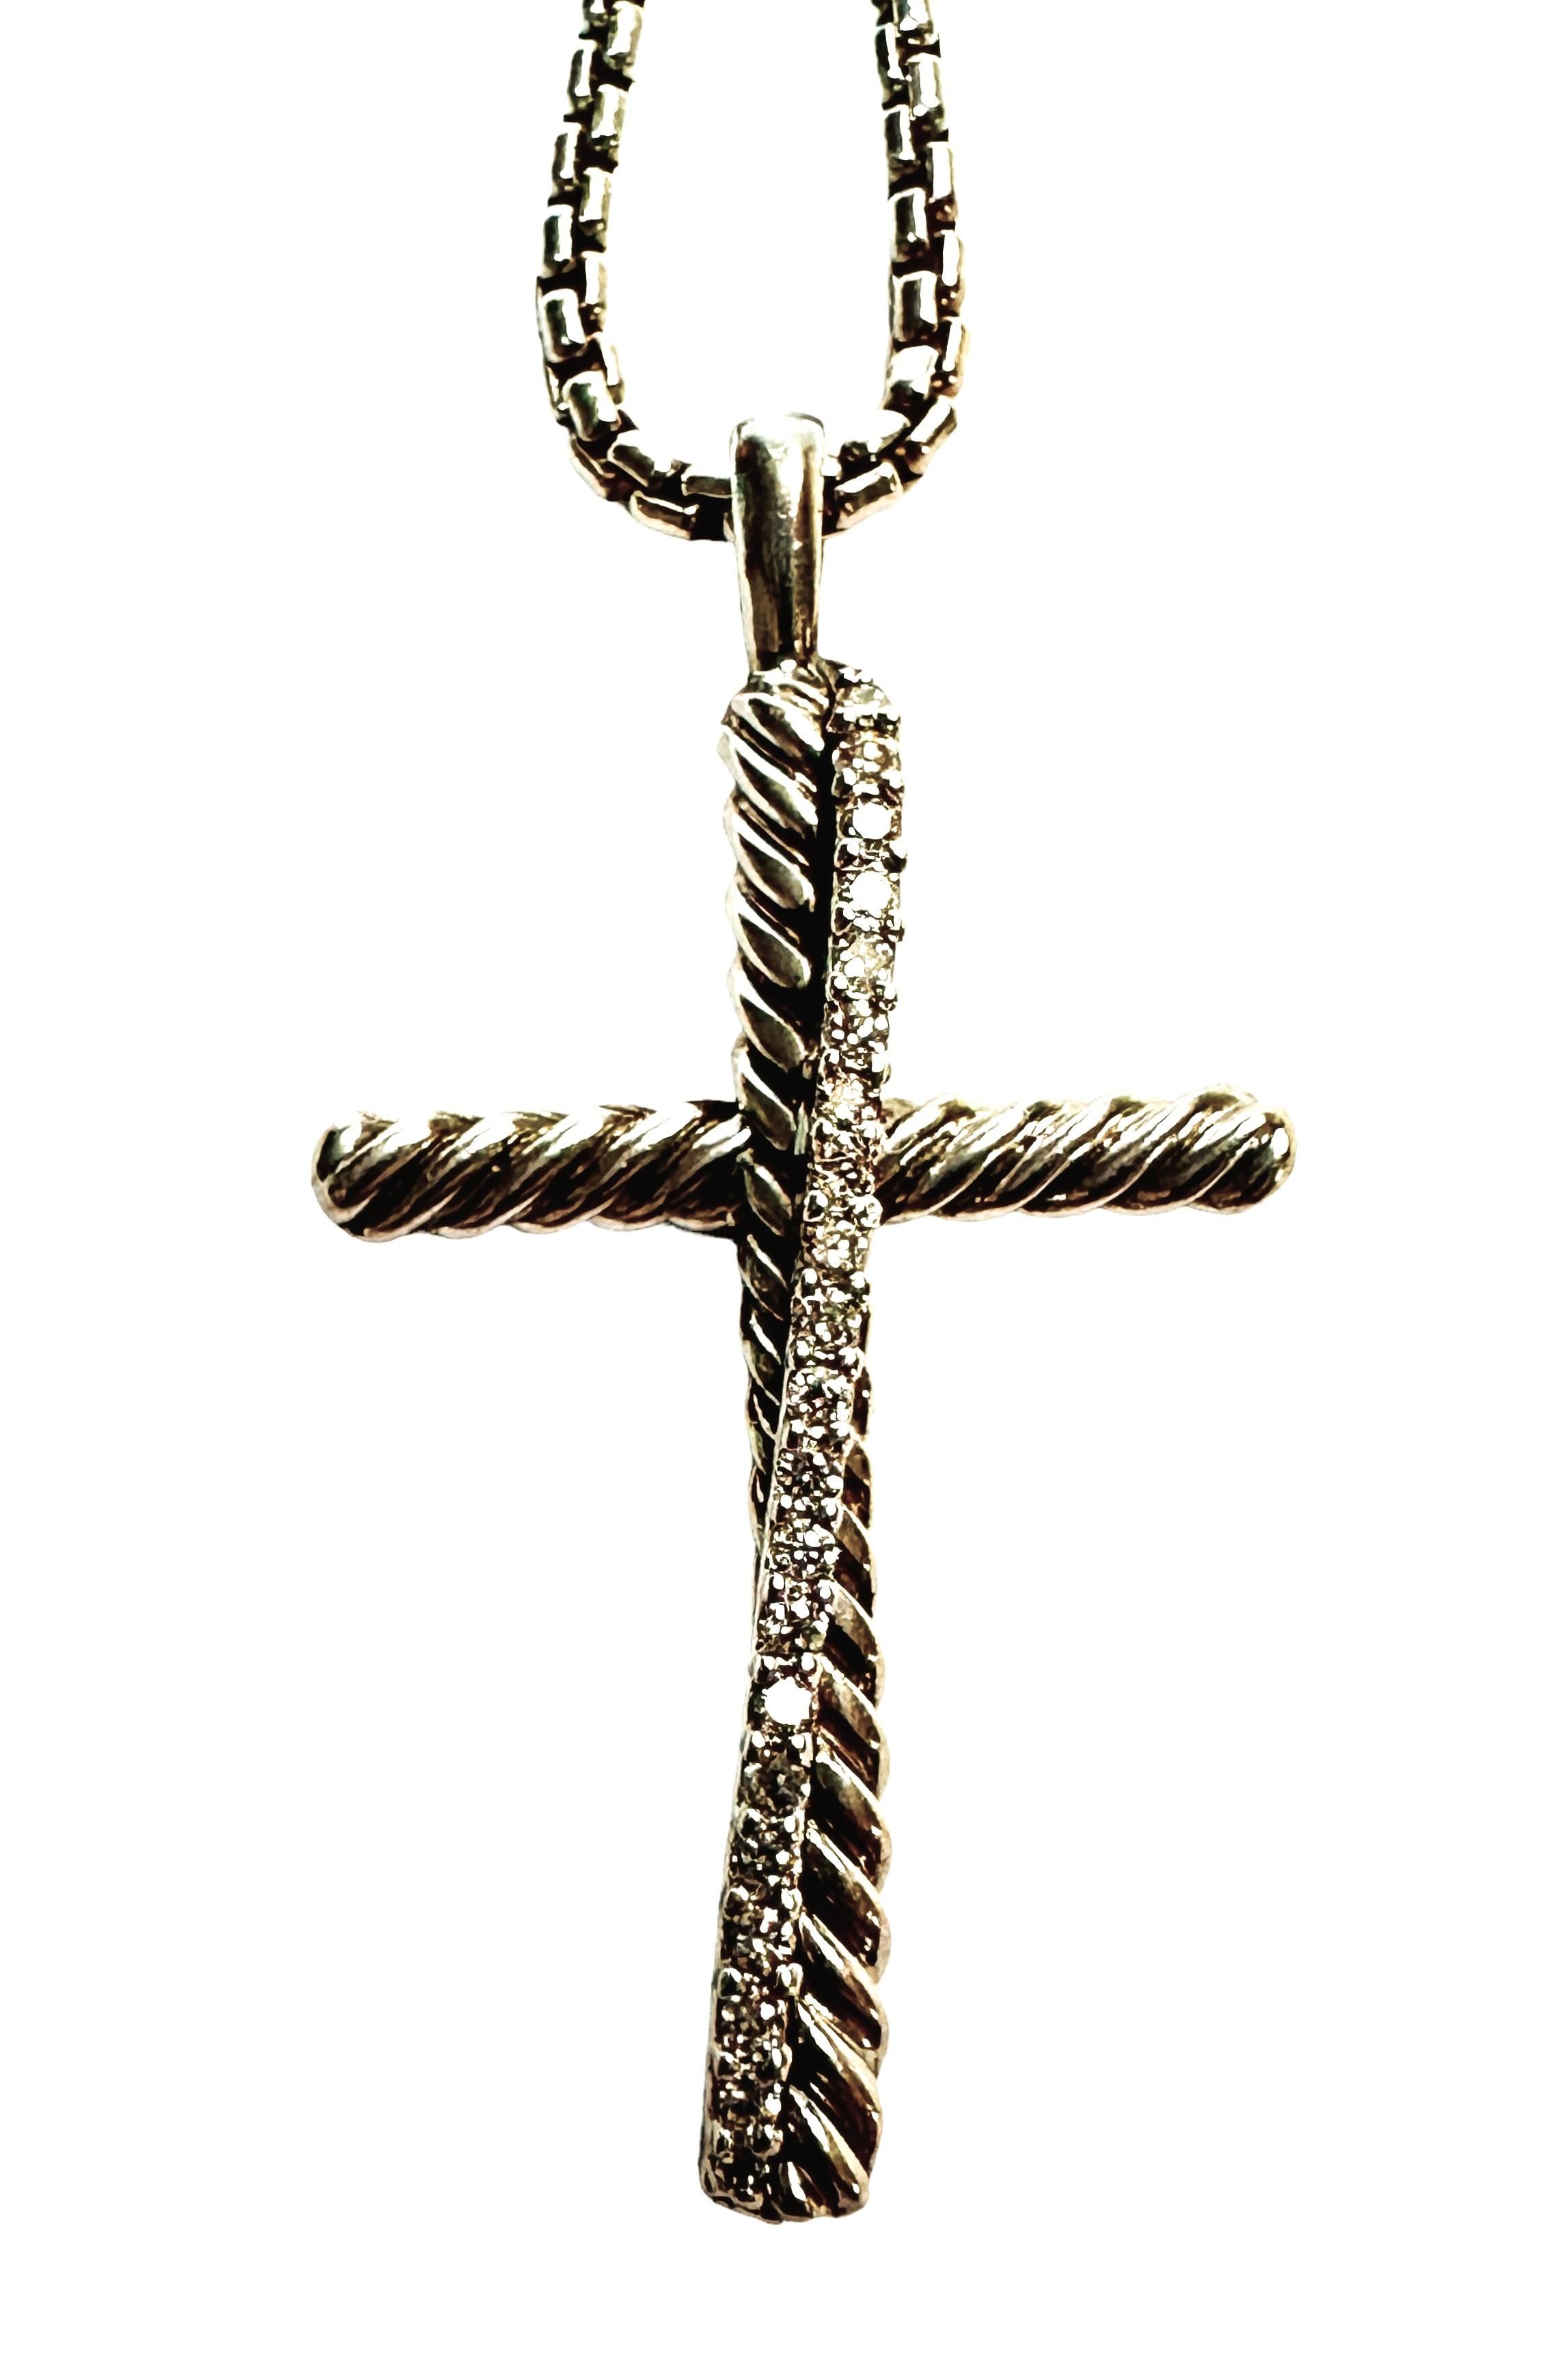 David Yurman Crossover Cross Necklace W Pave Diamonds Sterling Original Box In Excellent Condition For Sale In Eagan, MN